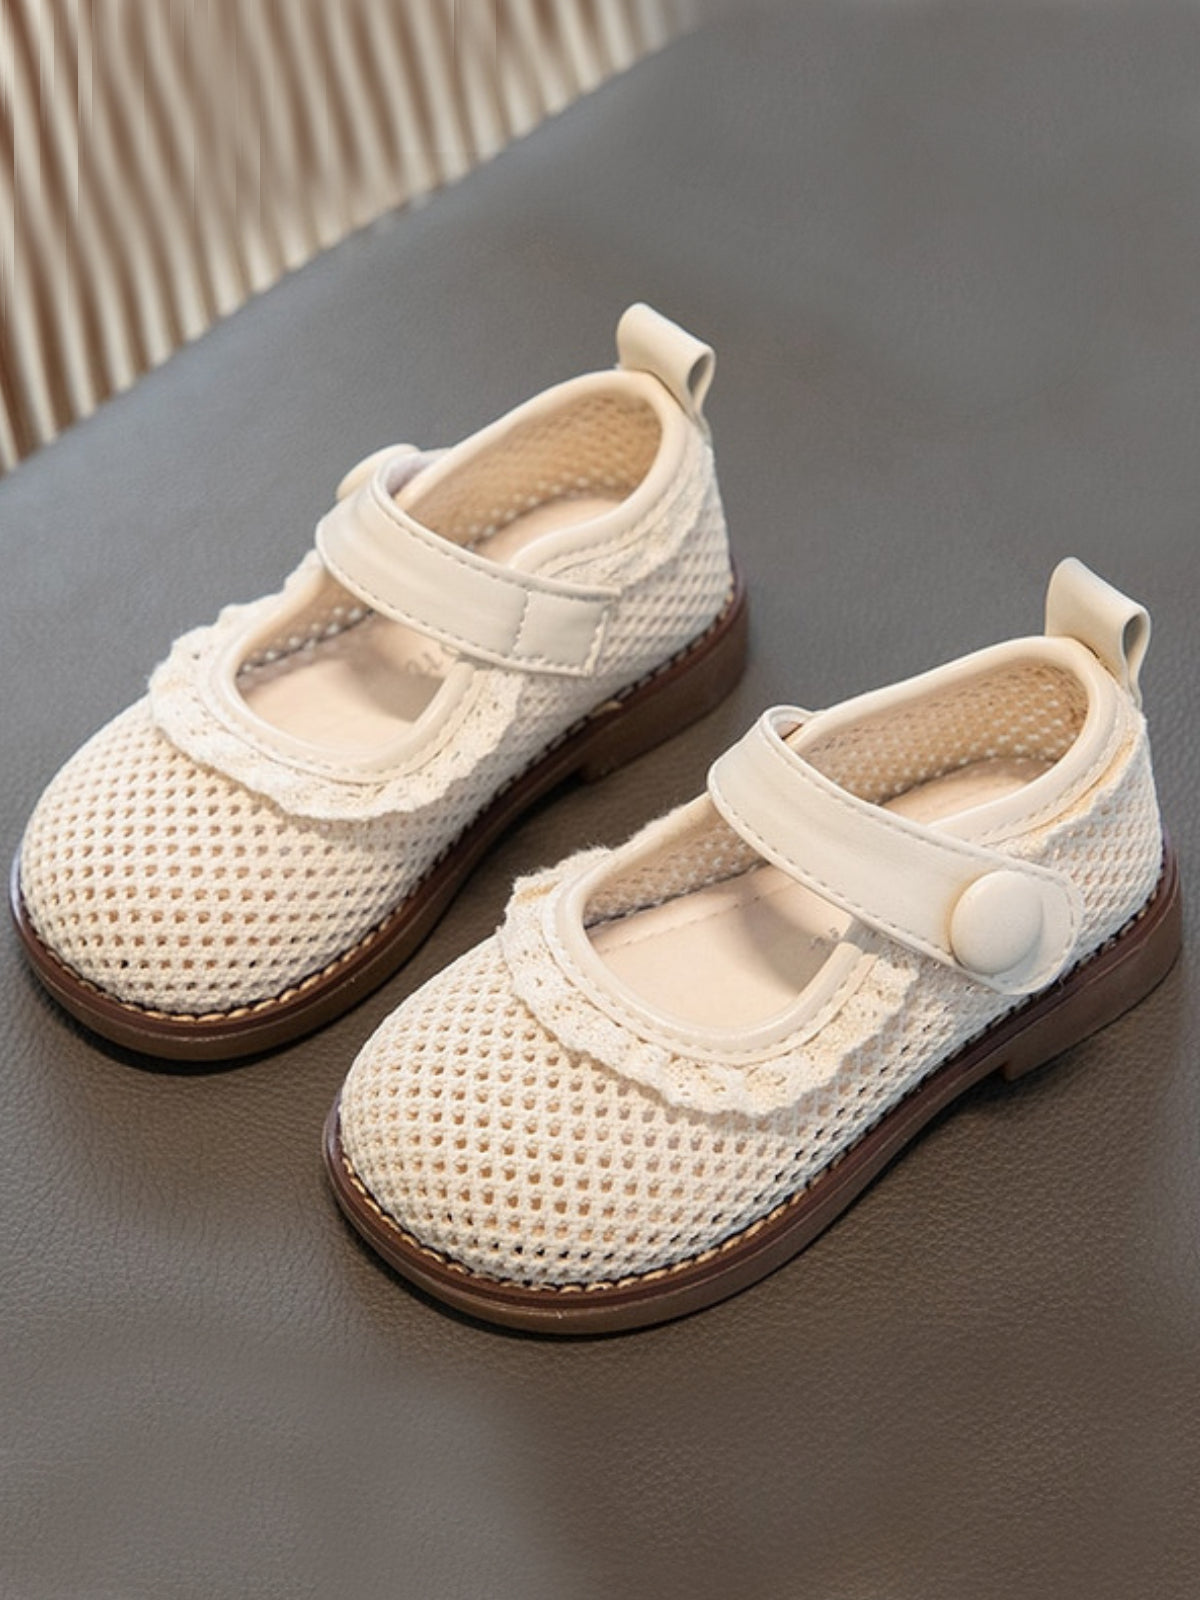 Mia Belle Girls Mesh Mary Jane Shoes | Shoes By Liv and Mia